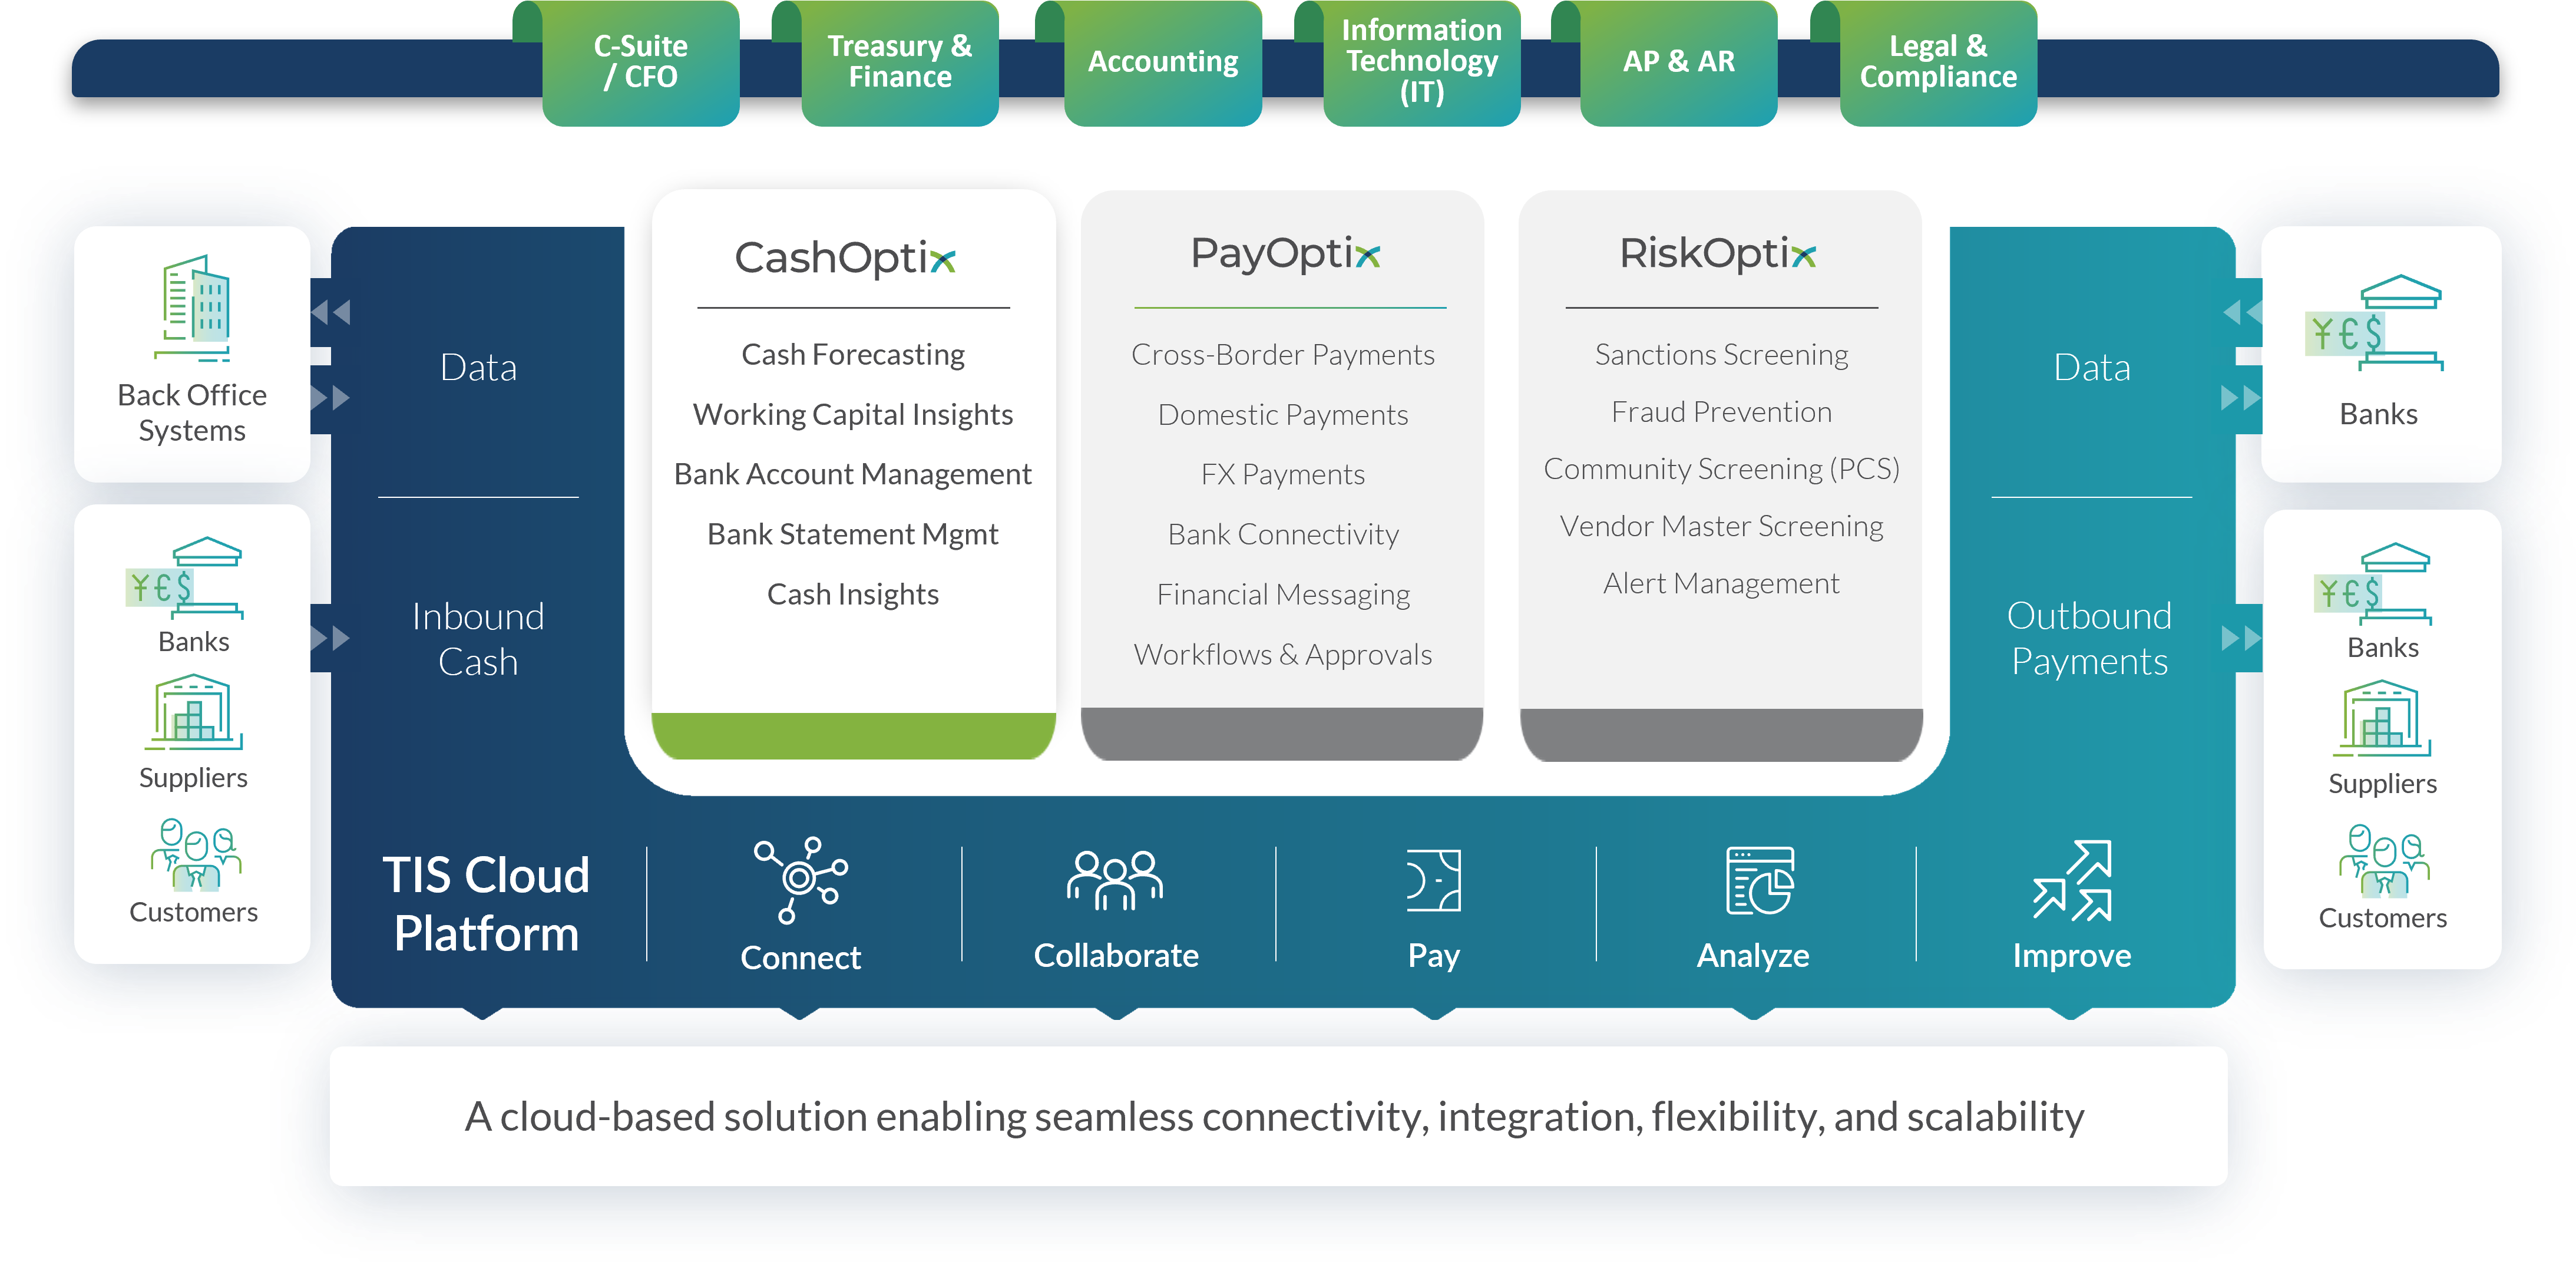 This image highlights the suite of cash management, forecasting, bank account management, and working capital analytics tools that TIS provides to clients.